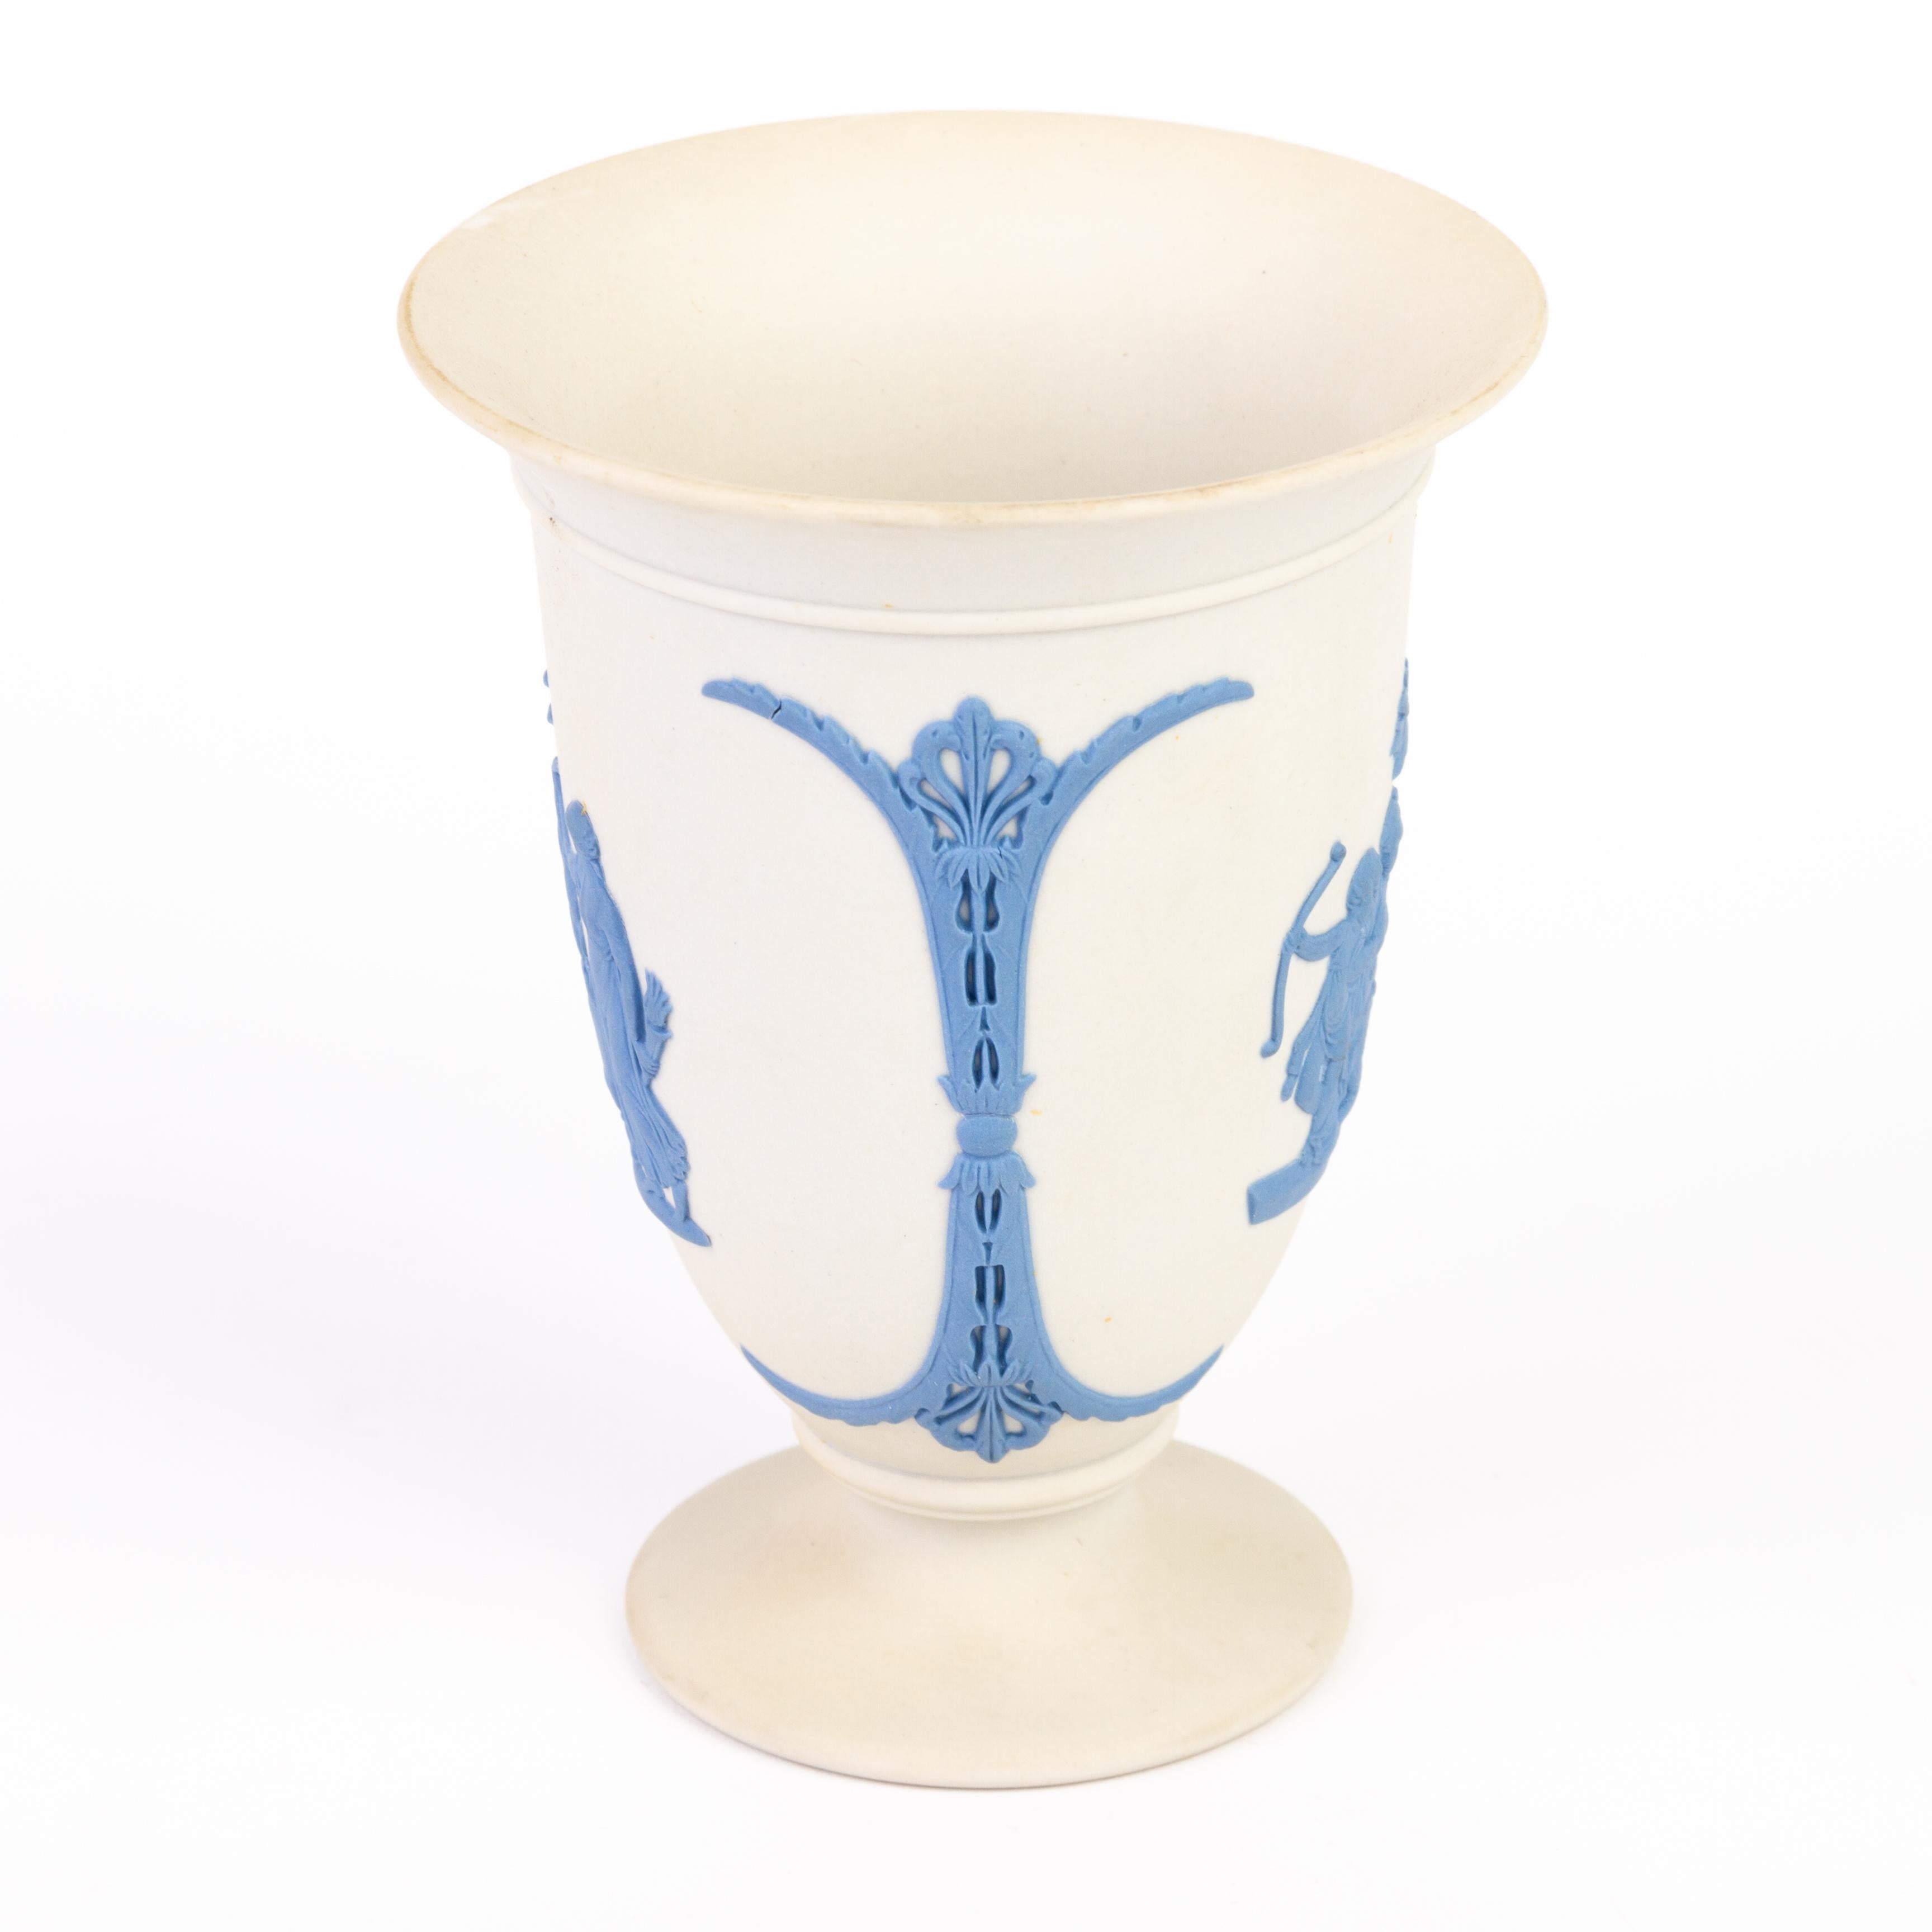 From a private collection.
Free international shipping.
Wedgwood White & Blue Jasperware Neoclassical Vase